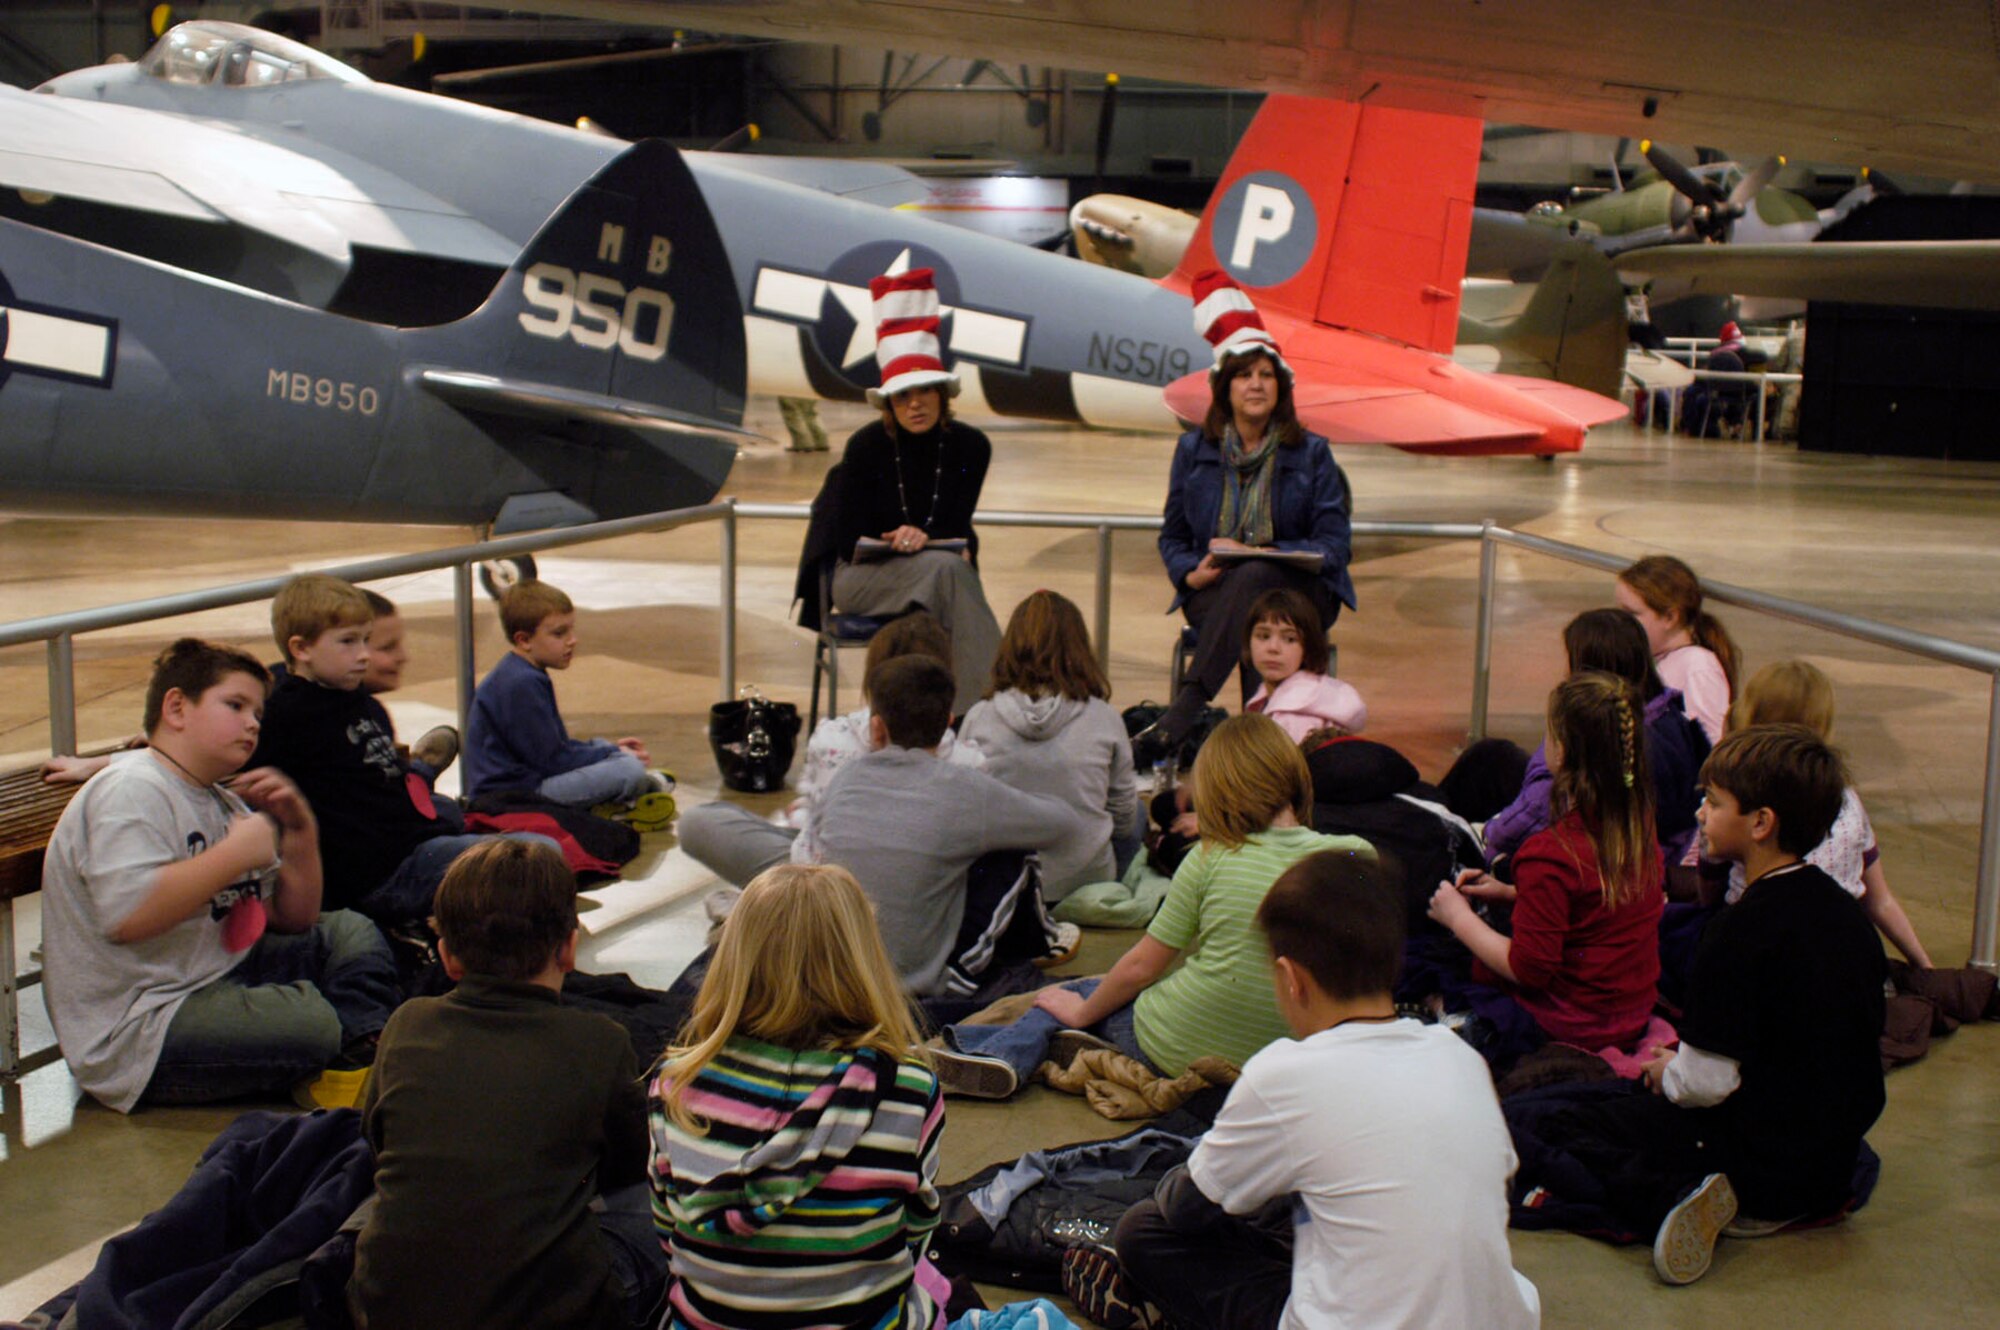 DAYTON, Ohio -- More than 1,000 second- and third-graders from the Dayton area participated in Read Across America at the National Museum of the U.S. Air Force on Feb. 25-26, 2010. Various reading stations were set up around the museum, and volunteers from Wright-Patterson Air Force Base read aviation-related stories during the national celebration, which takes place each year around Dr. Seuss' birthday. (U.S. Air Force photo)